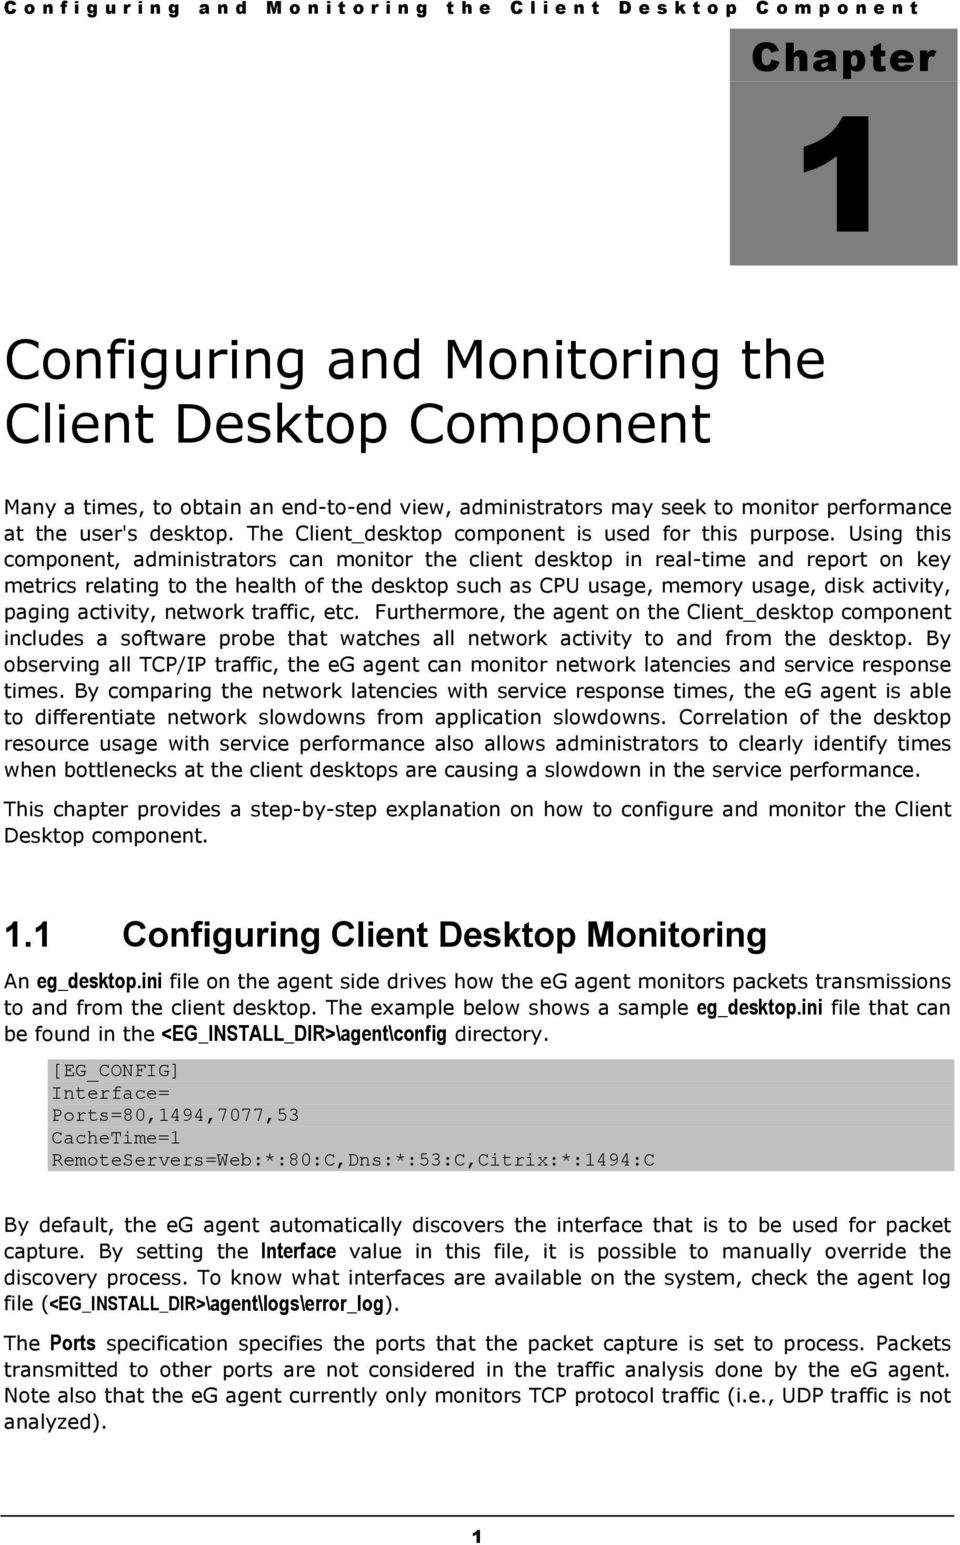 Using this component, administrators can monitor the client desktop in real-time and report on key metrics relating to the health of the desktop such as CPU usage, memory usage, disk activity, paging